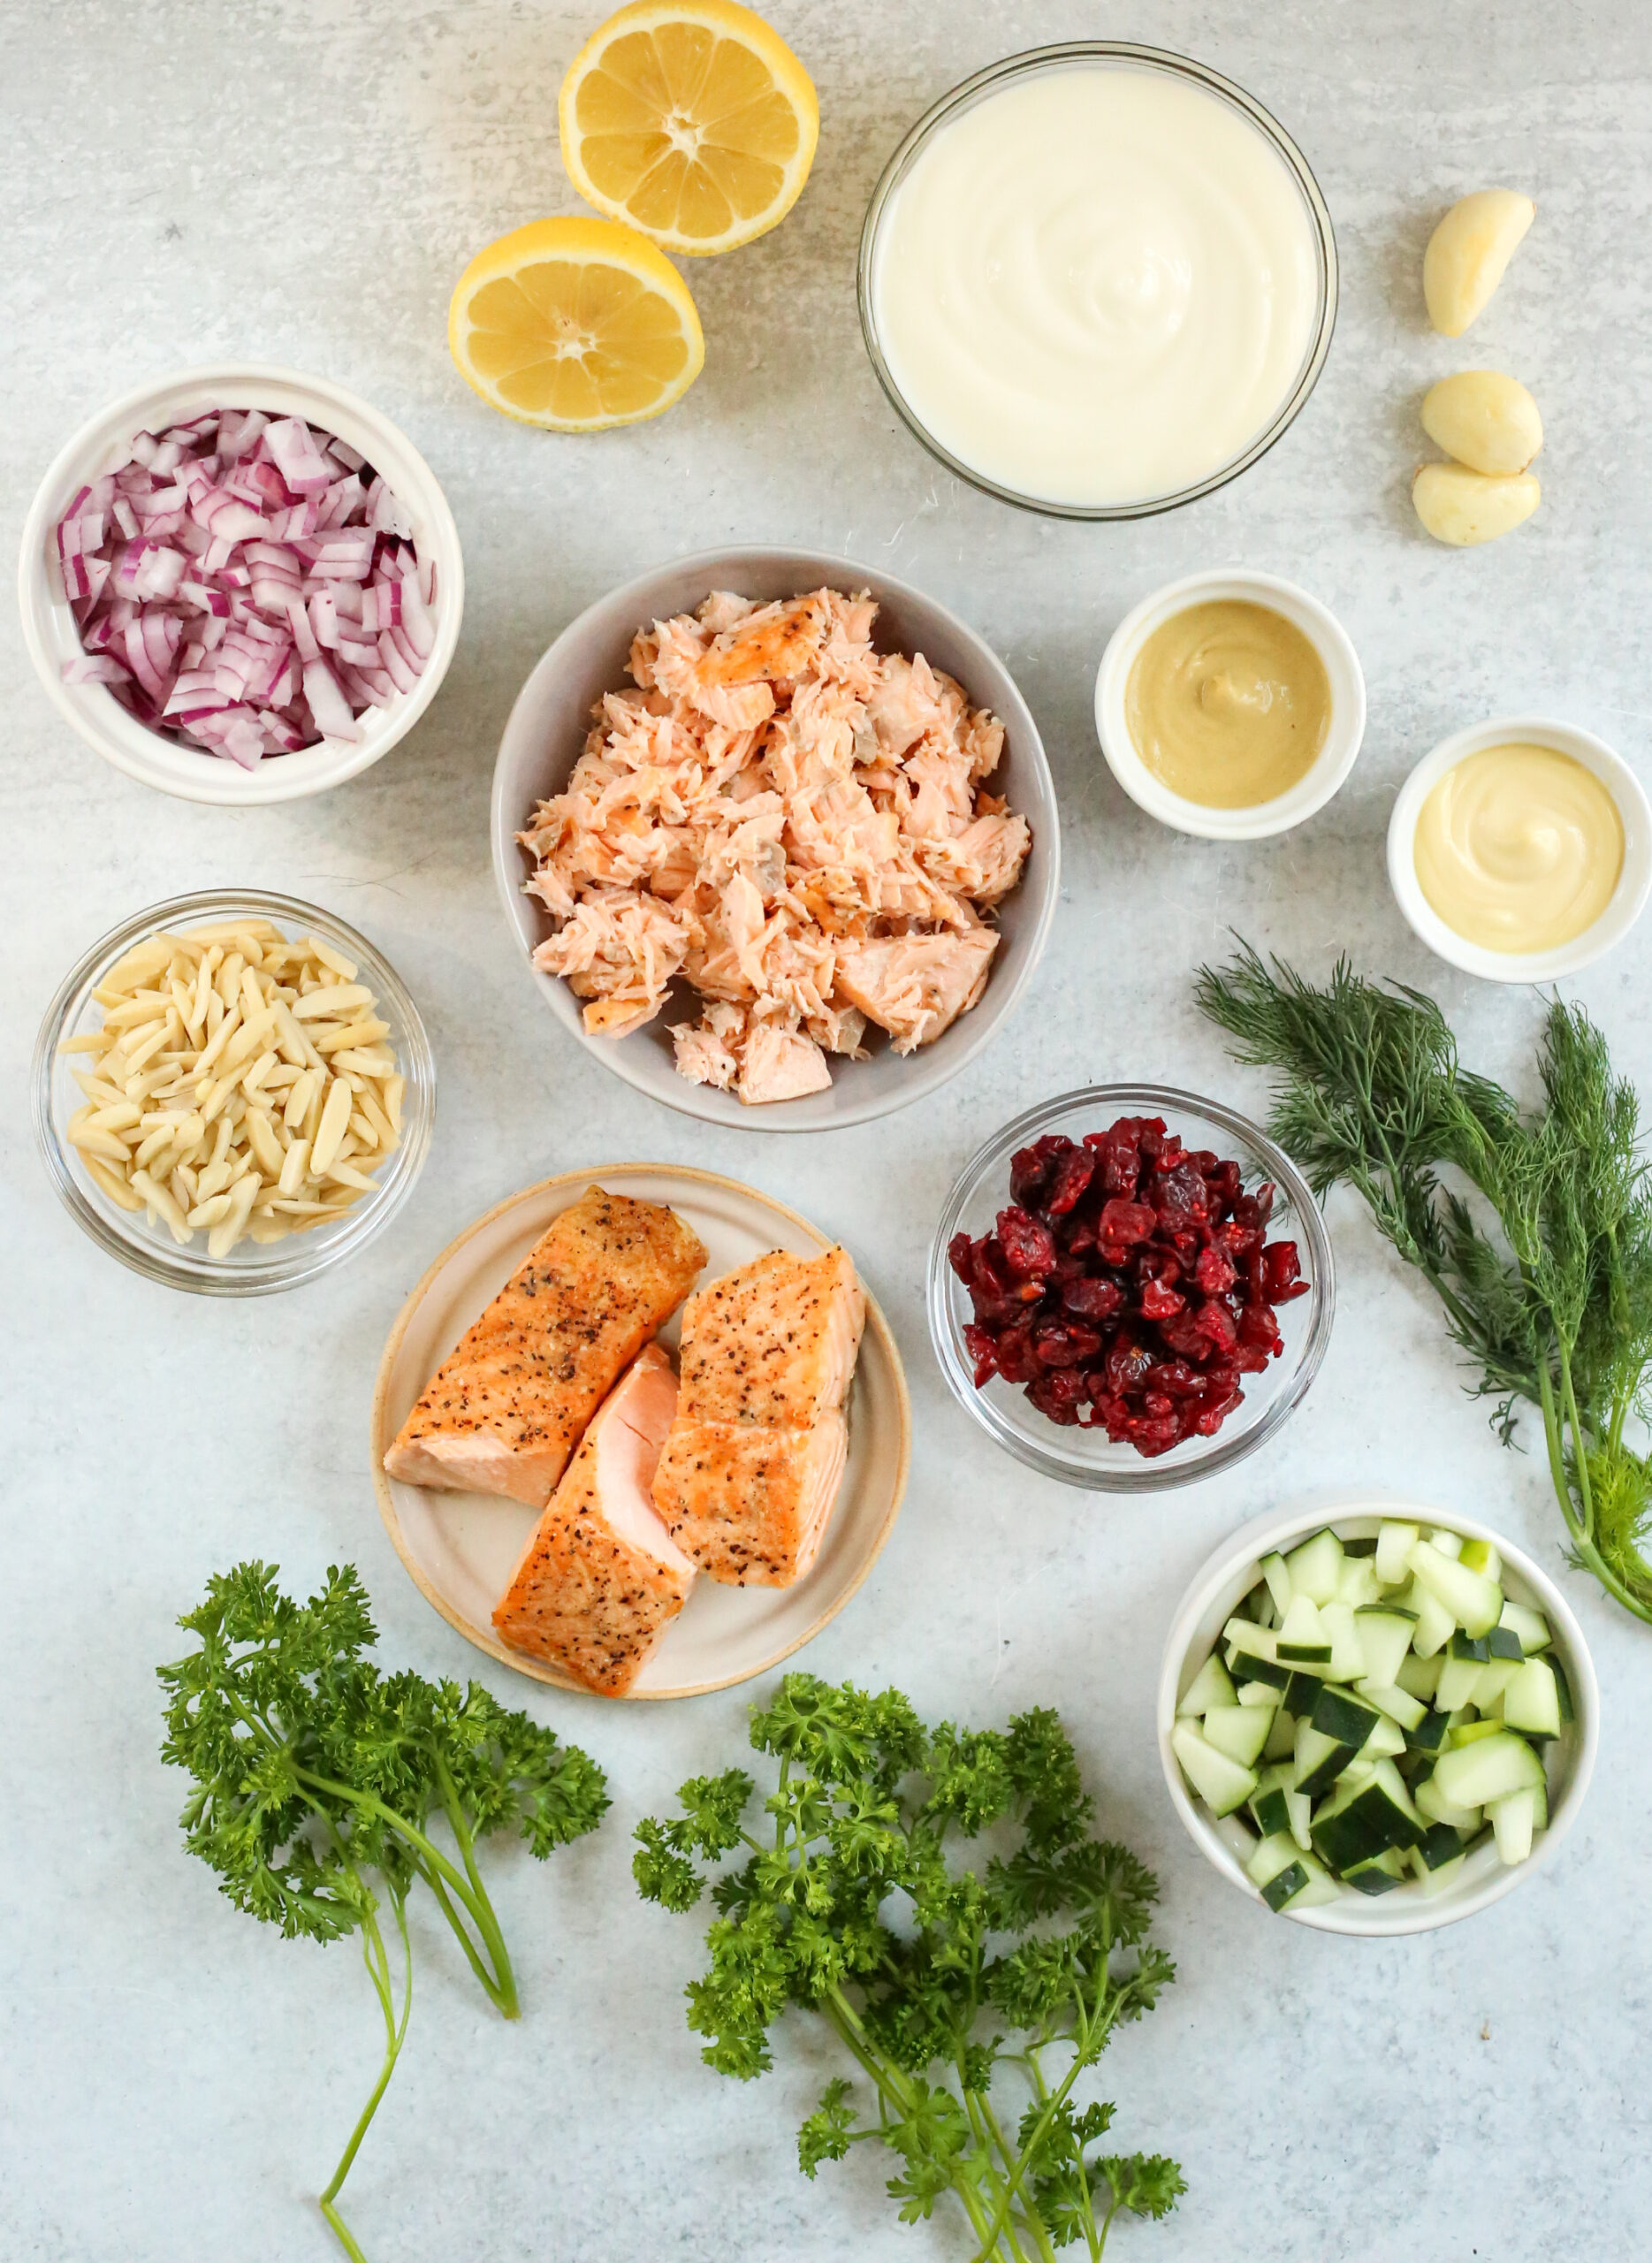 A flatlay of the ingredients needed to make a salmon salad recipe, including cooked salmon, diced cucumbers and red onions, dried cranberries, slivered almonds, fresh dill, fresh parsley, and smaller ramekins with mayo, yogurt, and dijon mustard